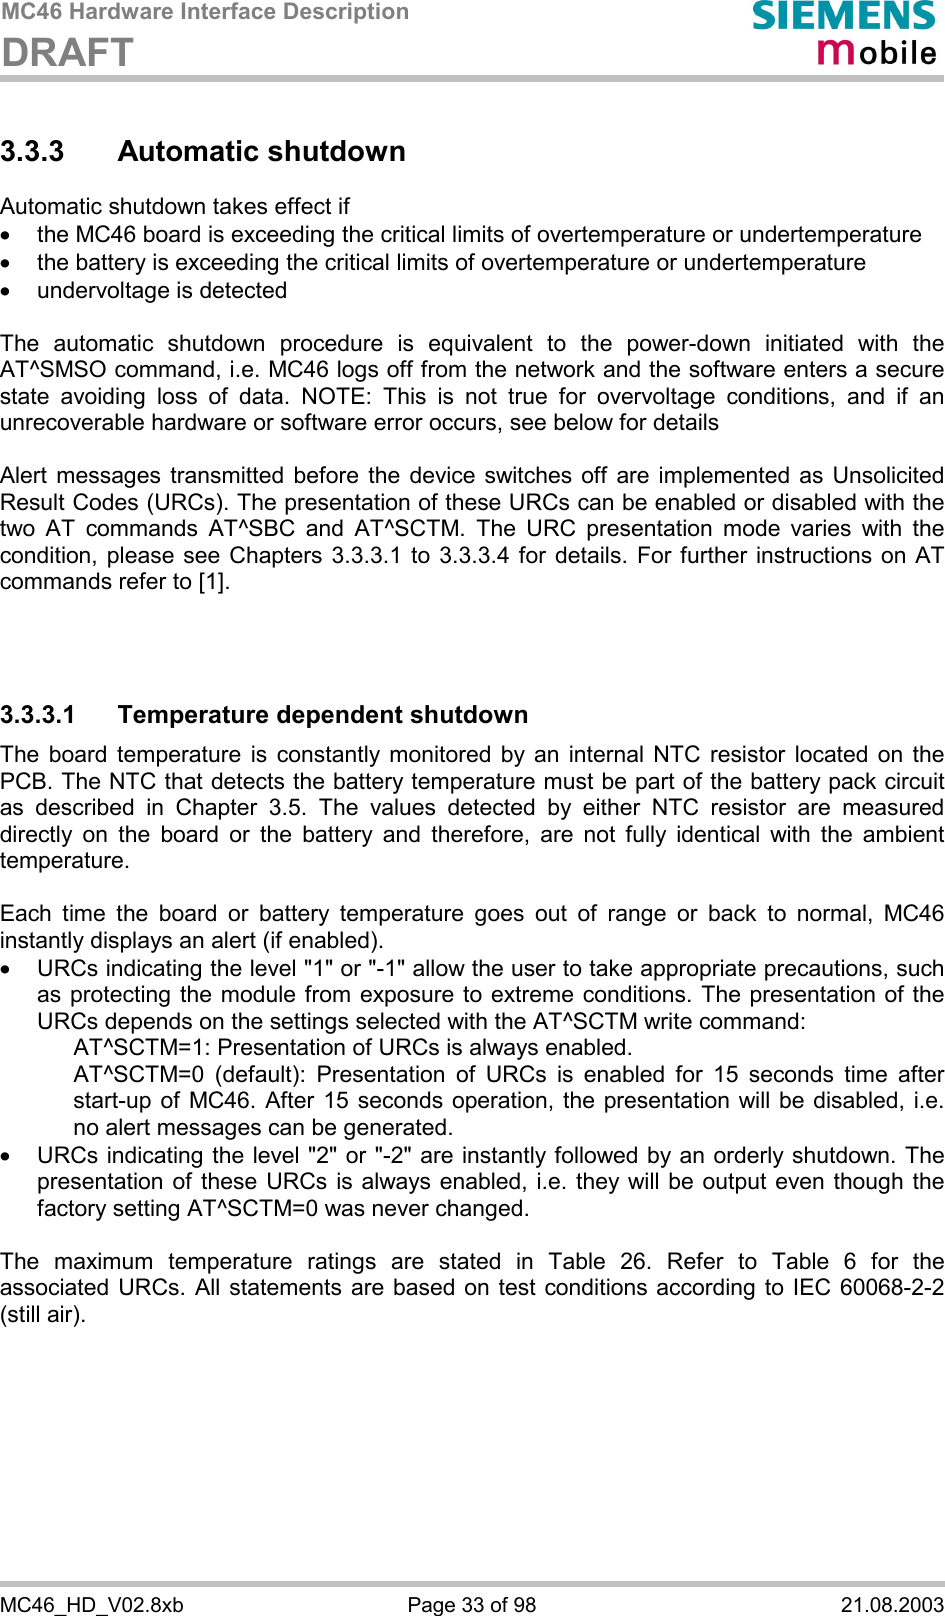 MC46 Hardware Interface Description DRAFT      MC46_HD_V02.8xb  Page 33 of 98  21.08.2003 3.3.3 Automatic shutdown Automatic shutdown takes effect if ·  the MC46 board is exceeding the critical limits of overtemperature or undertemperature ·  the battery is exceeding the critical limits of overtemperature or undertemperature ·  undervoltage is detected  The automatic shutdown procedure is equivalent to the power-down initiated with the AT^SMSO command, i.e. MC46 logs off from the network and the software enters a secure state avoiding loss of data. NOTE: This is not true for overvoltage conditions, and if an unrecoverable hardware or software error occurs, see below for details  Alert messages transmitted before the device switches off are implemented as Unsolicited Result Codes (URCs). The presentation of these URCs can be enabled or disabled with the two AT commands AT^SBC and AT^SCTM. The URC presentation mode varies with the condition, please see Chapters 3.3.3.1 to 3.3.3.4 for details. For further instructions on AT commands refer to [1].    3.3.3.1  Temperature dependent shutdown The board temperature is constantly monitored by an internal NTC resistor located on the PCB. The NTC that detects the battery temperature must be part of the battery pack circuit as described in Chapter 3.5. The values detected by either NTC resistor are measured directly on the board or the battery and therefore, are not fully identical with the ambient temperature.   Each time the board or battery temperature goes out of range or back to normal, MC46 instantly displays an alert (if enabled). ·  URCs indicating the level &quot;1&quot; or &quot;-1&quot; allow the user to take appropriate precautions, such as protecting the module from exposure to extreme conditions. The presentation of the URCs depends on the settings selected with the AT^SCTM write command:     AT^SCTM=1: Presentation of URCs is always enabled.      AT^SCTM=0 (default): Presentation of URCs is enabled for 15 seconds time after start-up of MC46. After 15 seconds operation, the presentation will be disabled, i.e. no alert messages can be generated.  ·  URCs indicating the level &quot;2&quot; or &quot;-2&quot; are instantly followed by an orderly shutdown. The presentation of these URCs is always enabled, i.e. they will be output even though the factory setting AT^SCTM=0 was never changed.  The maximum temperature ratings are stated in Table 26. Refer to Table 6 for the associated URCs. All statements are based on test conditions according to IEC 60068-2-2 (still air).  